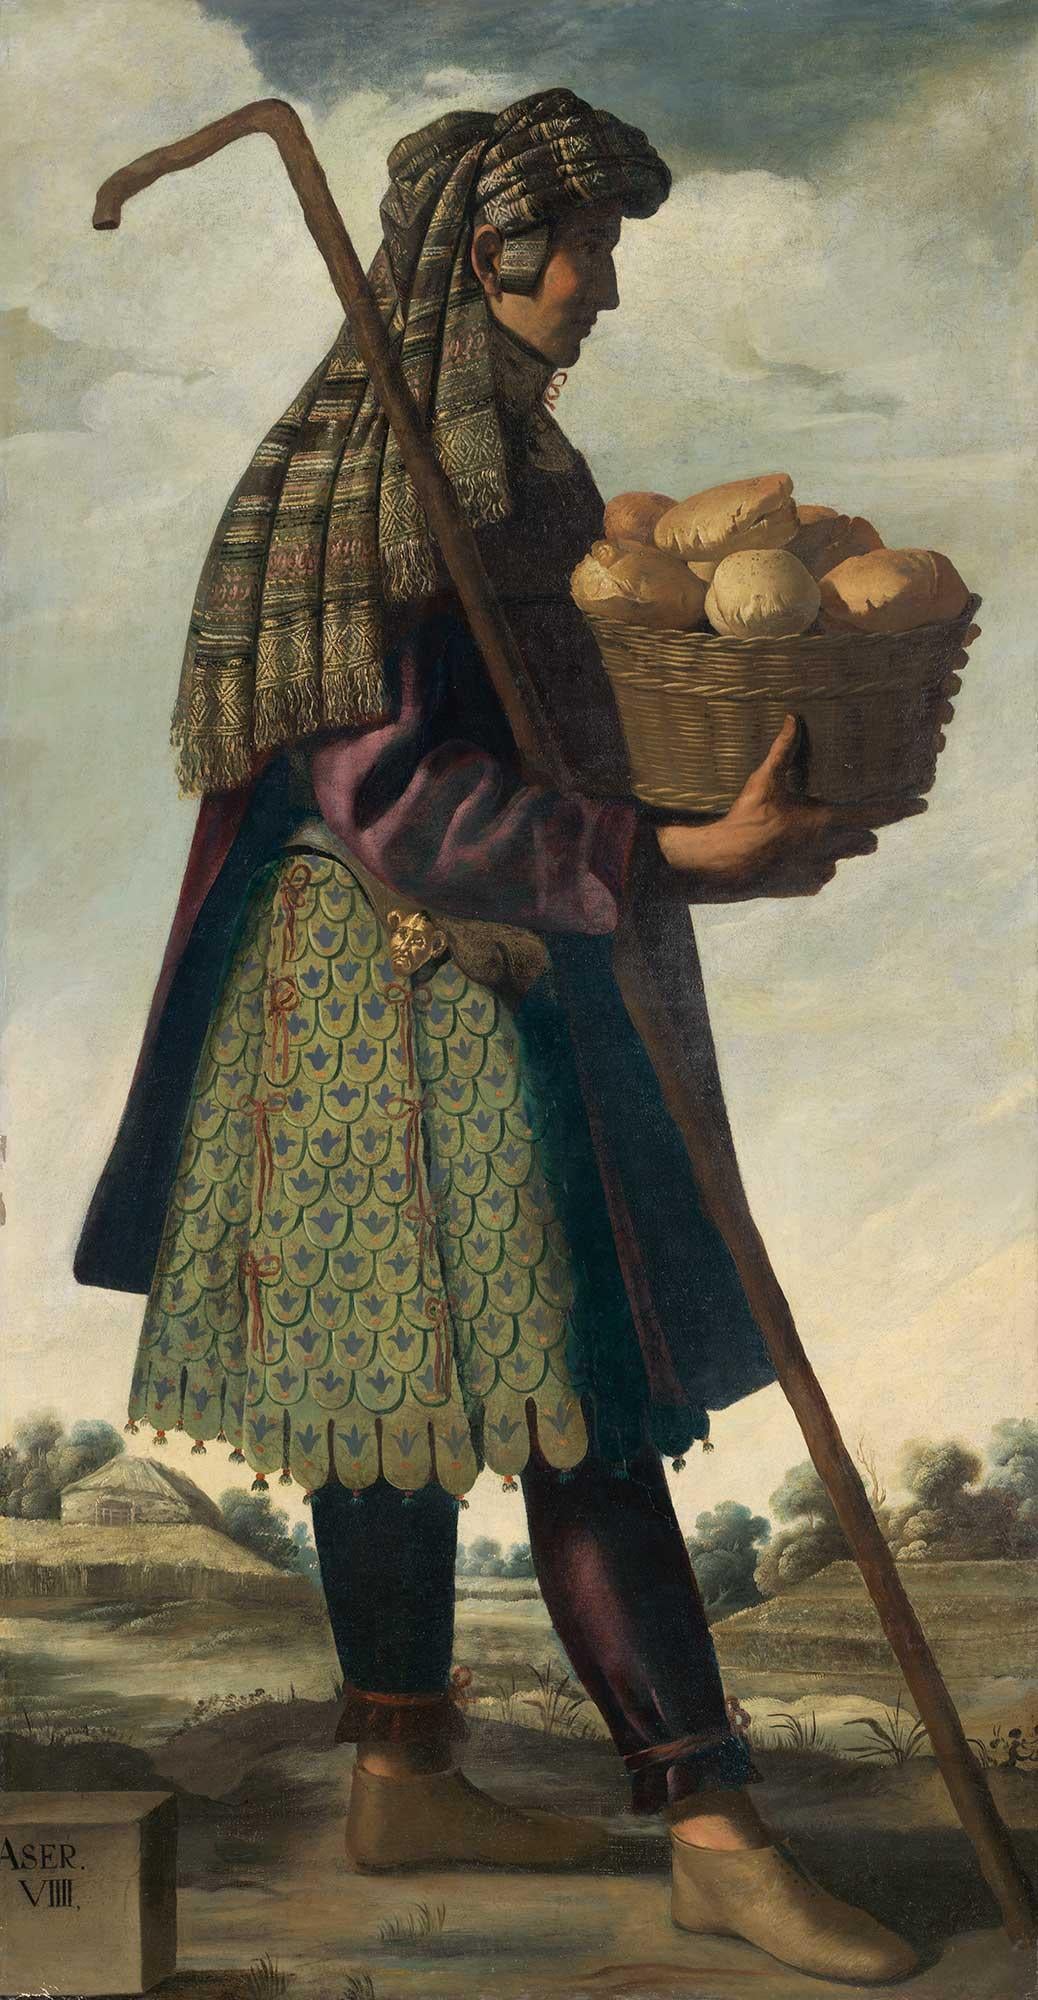 oil painting depicting man holding basket of bread, with large staff